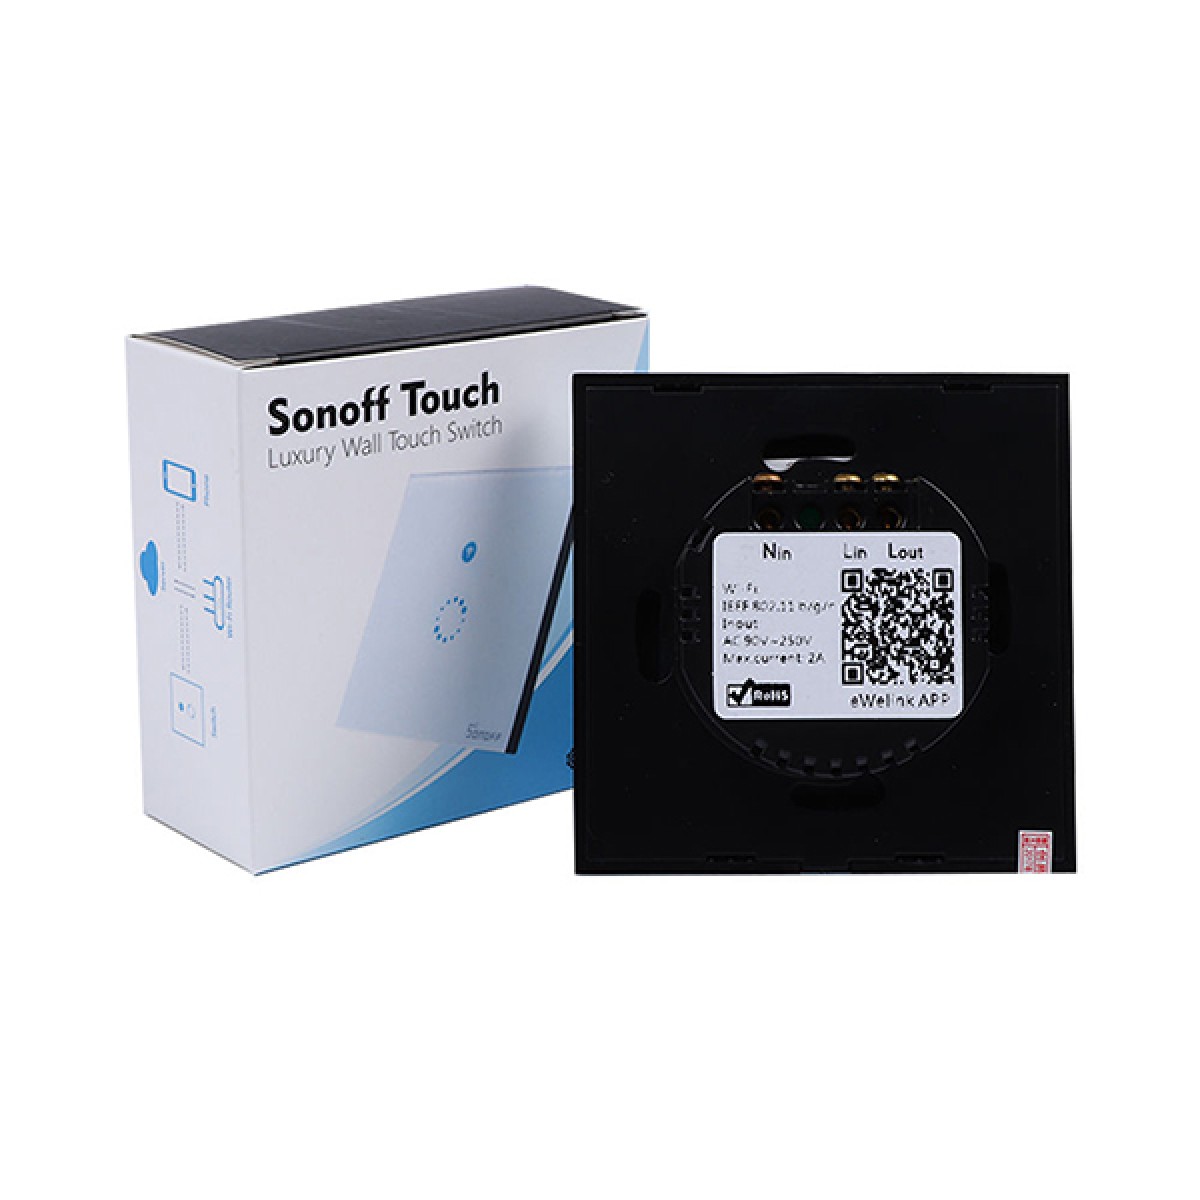 SONOFF TOUCH WIFI WALL SWITCH WIRELESS TOUCH LED LIGHT CONTROLLER SMART HOME-OEM